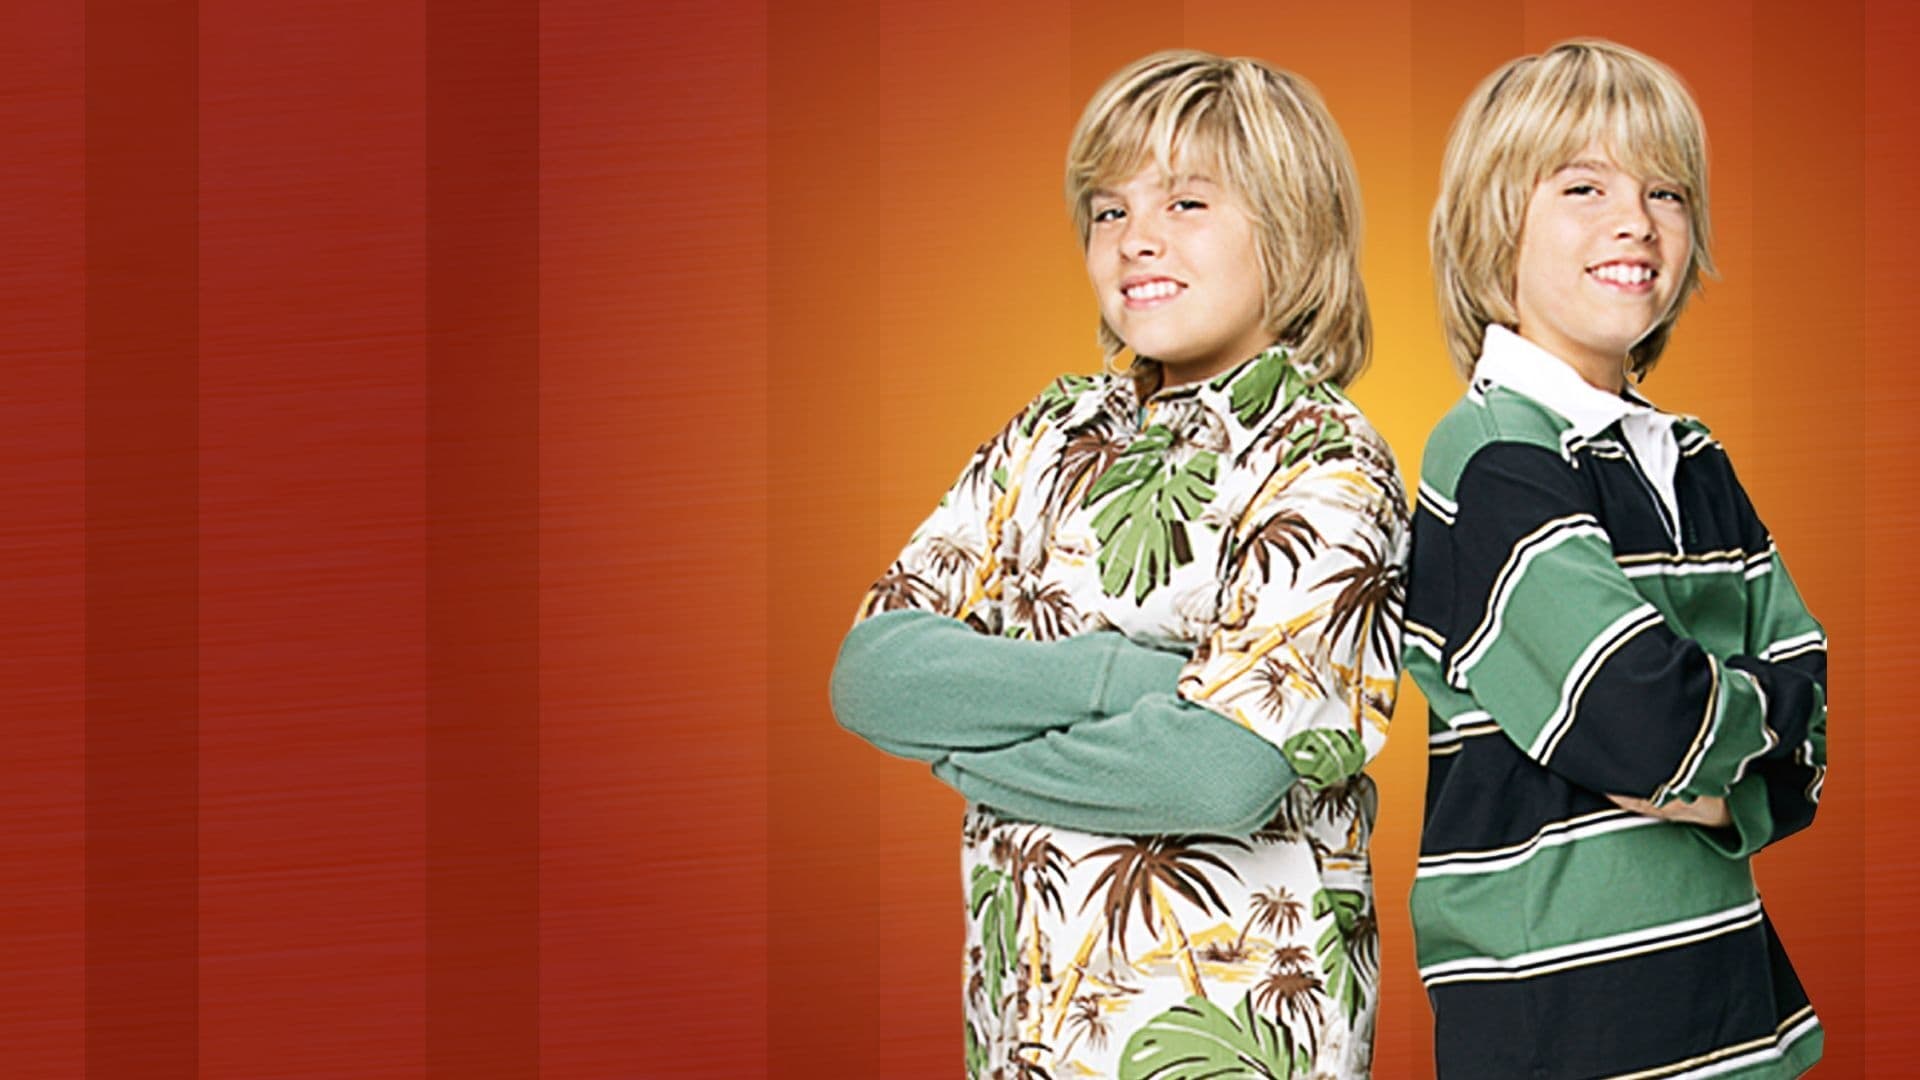 Meet Zack And Cody, 11 Year-old Identical Twins And The Newest Residents Of...